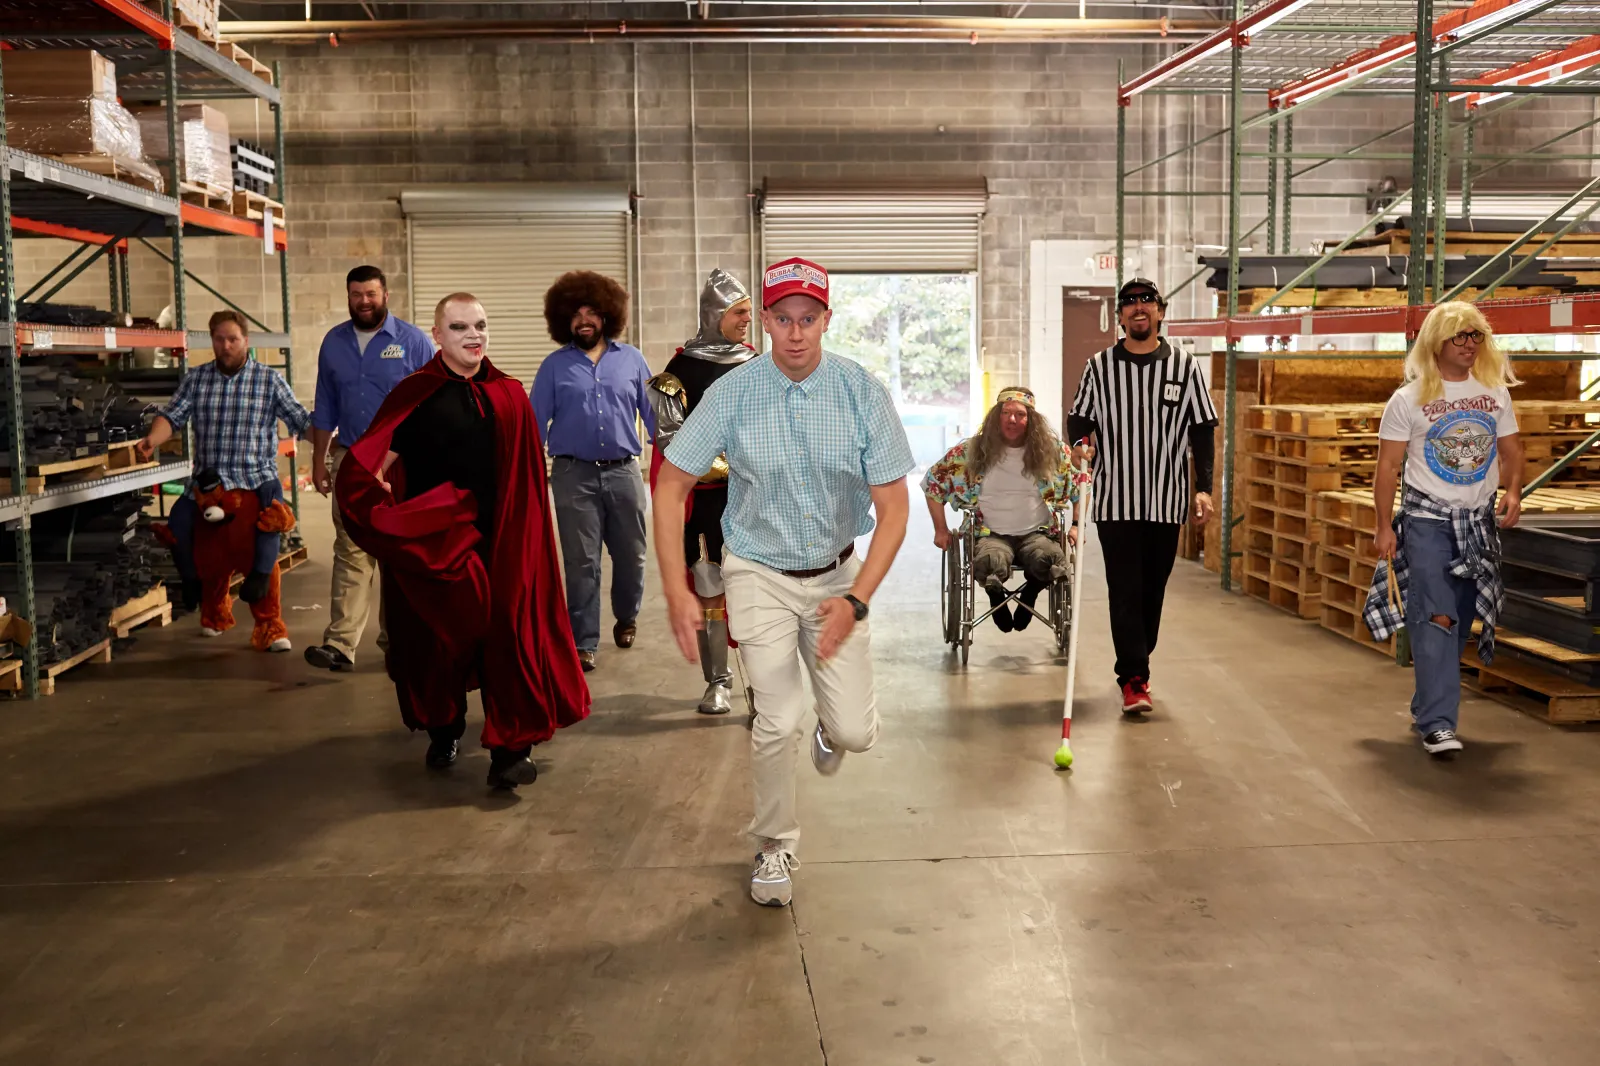 a group of people walking in a warehouse